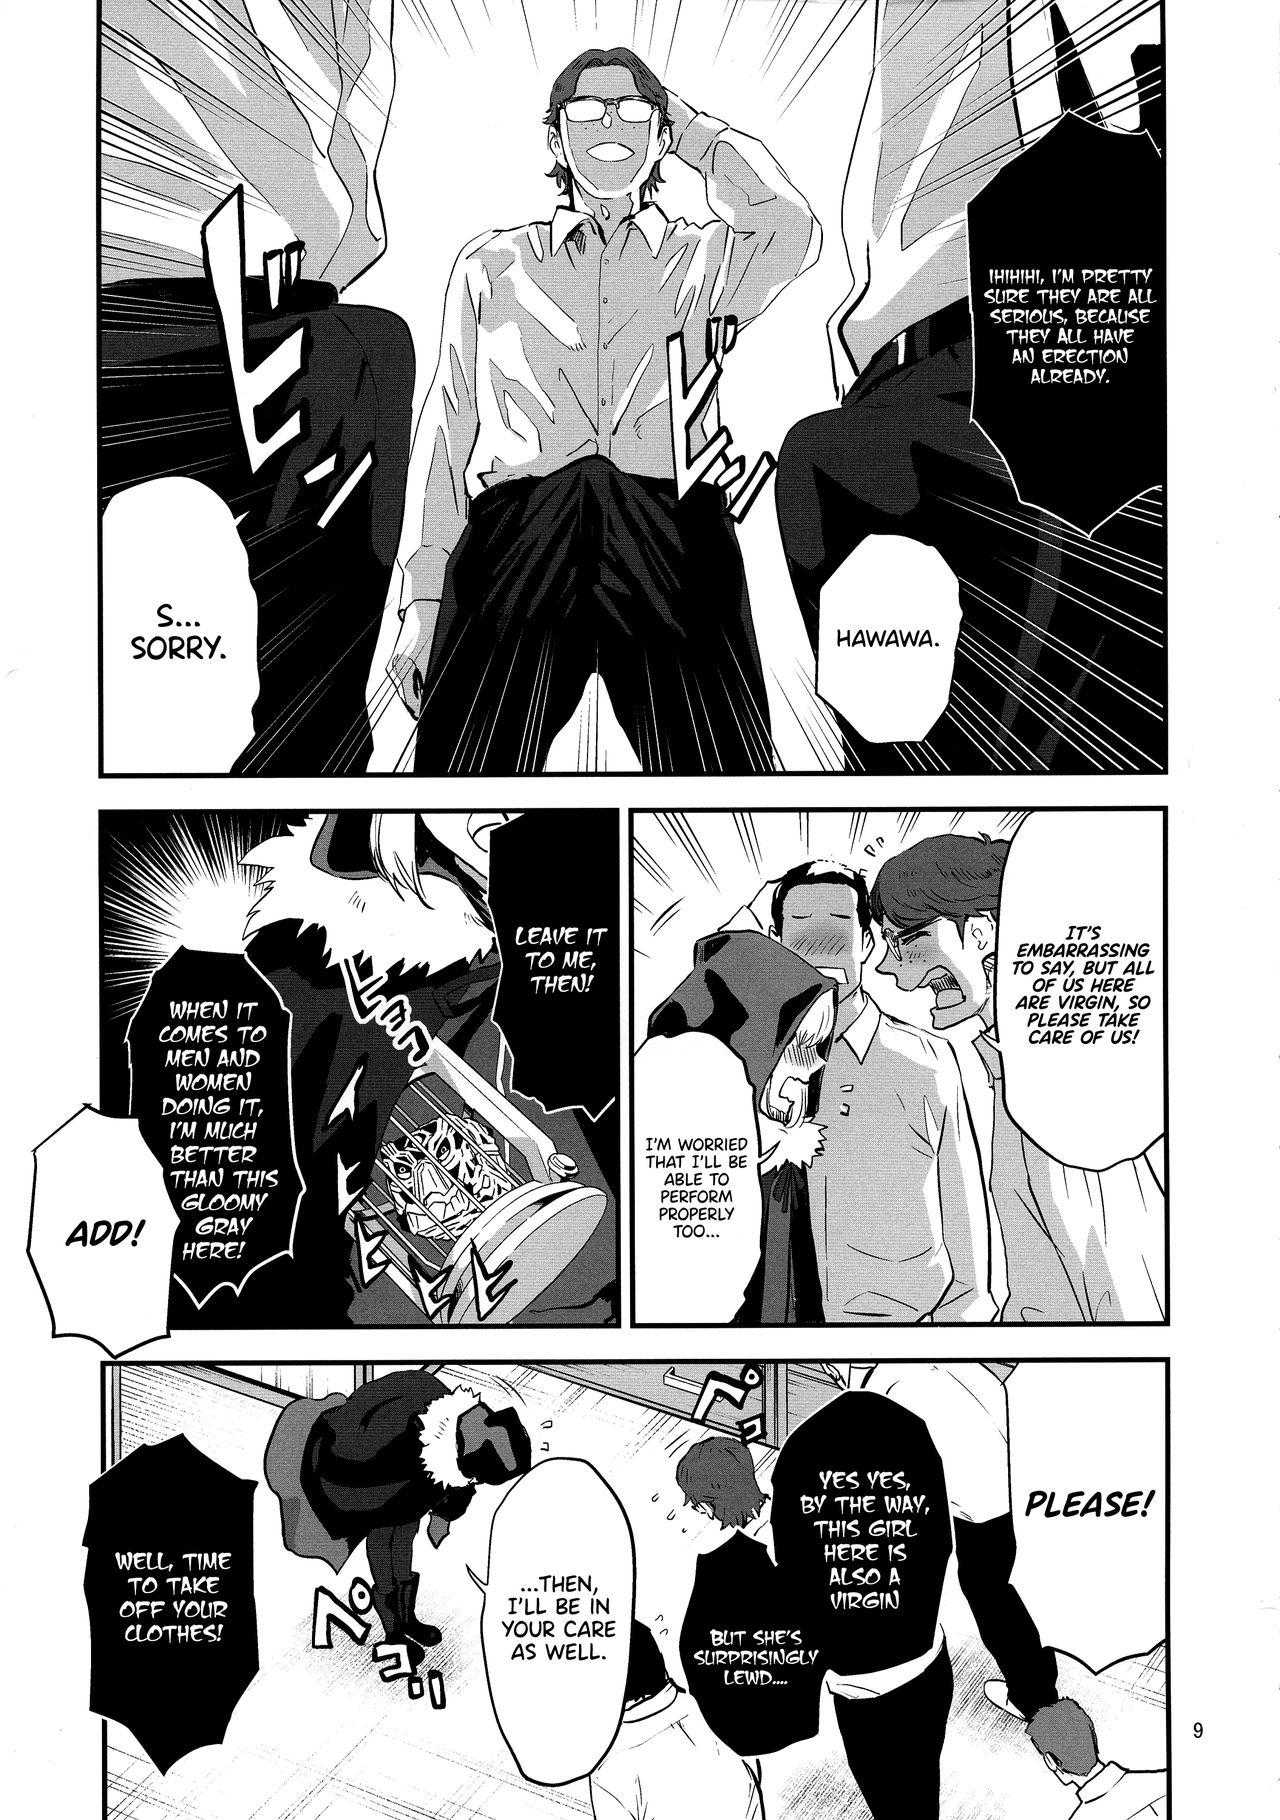 Fucking Sex Taking Advantage of Gray-chan Weakness, We Graduated from our Virginity. - Lord el-melloi ii sei no jikenbo Spank - Page 9